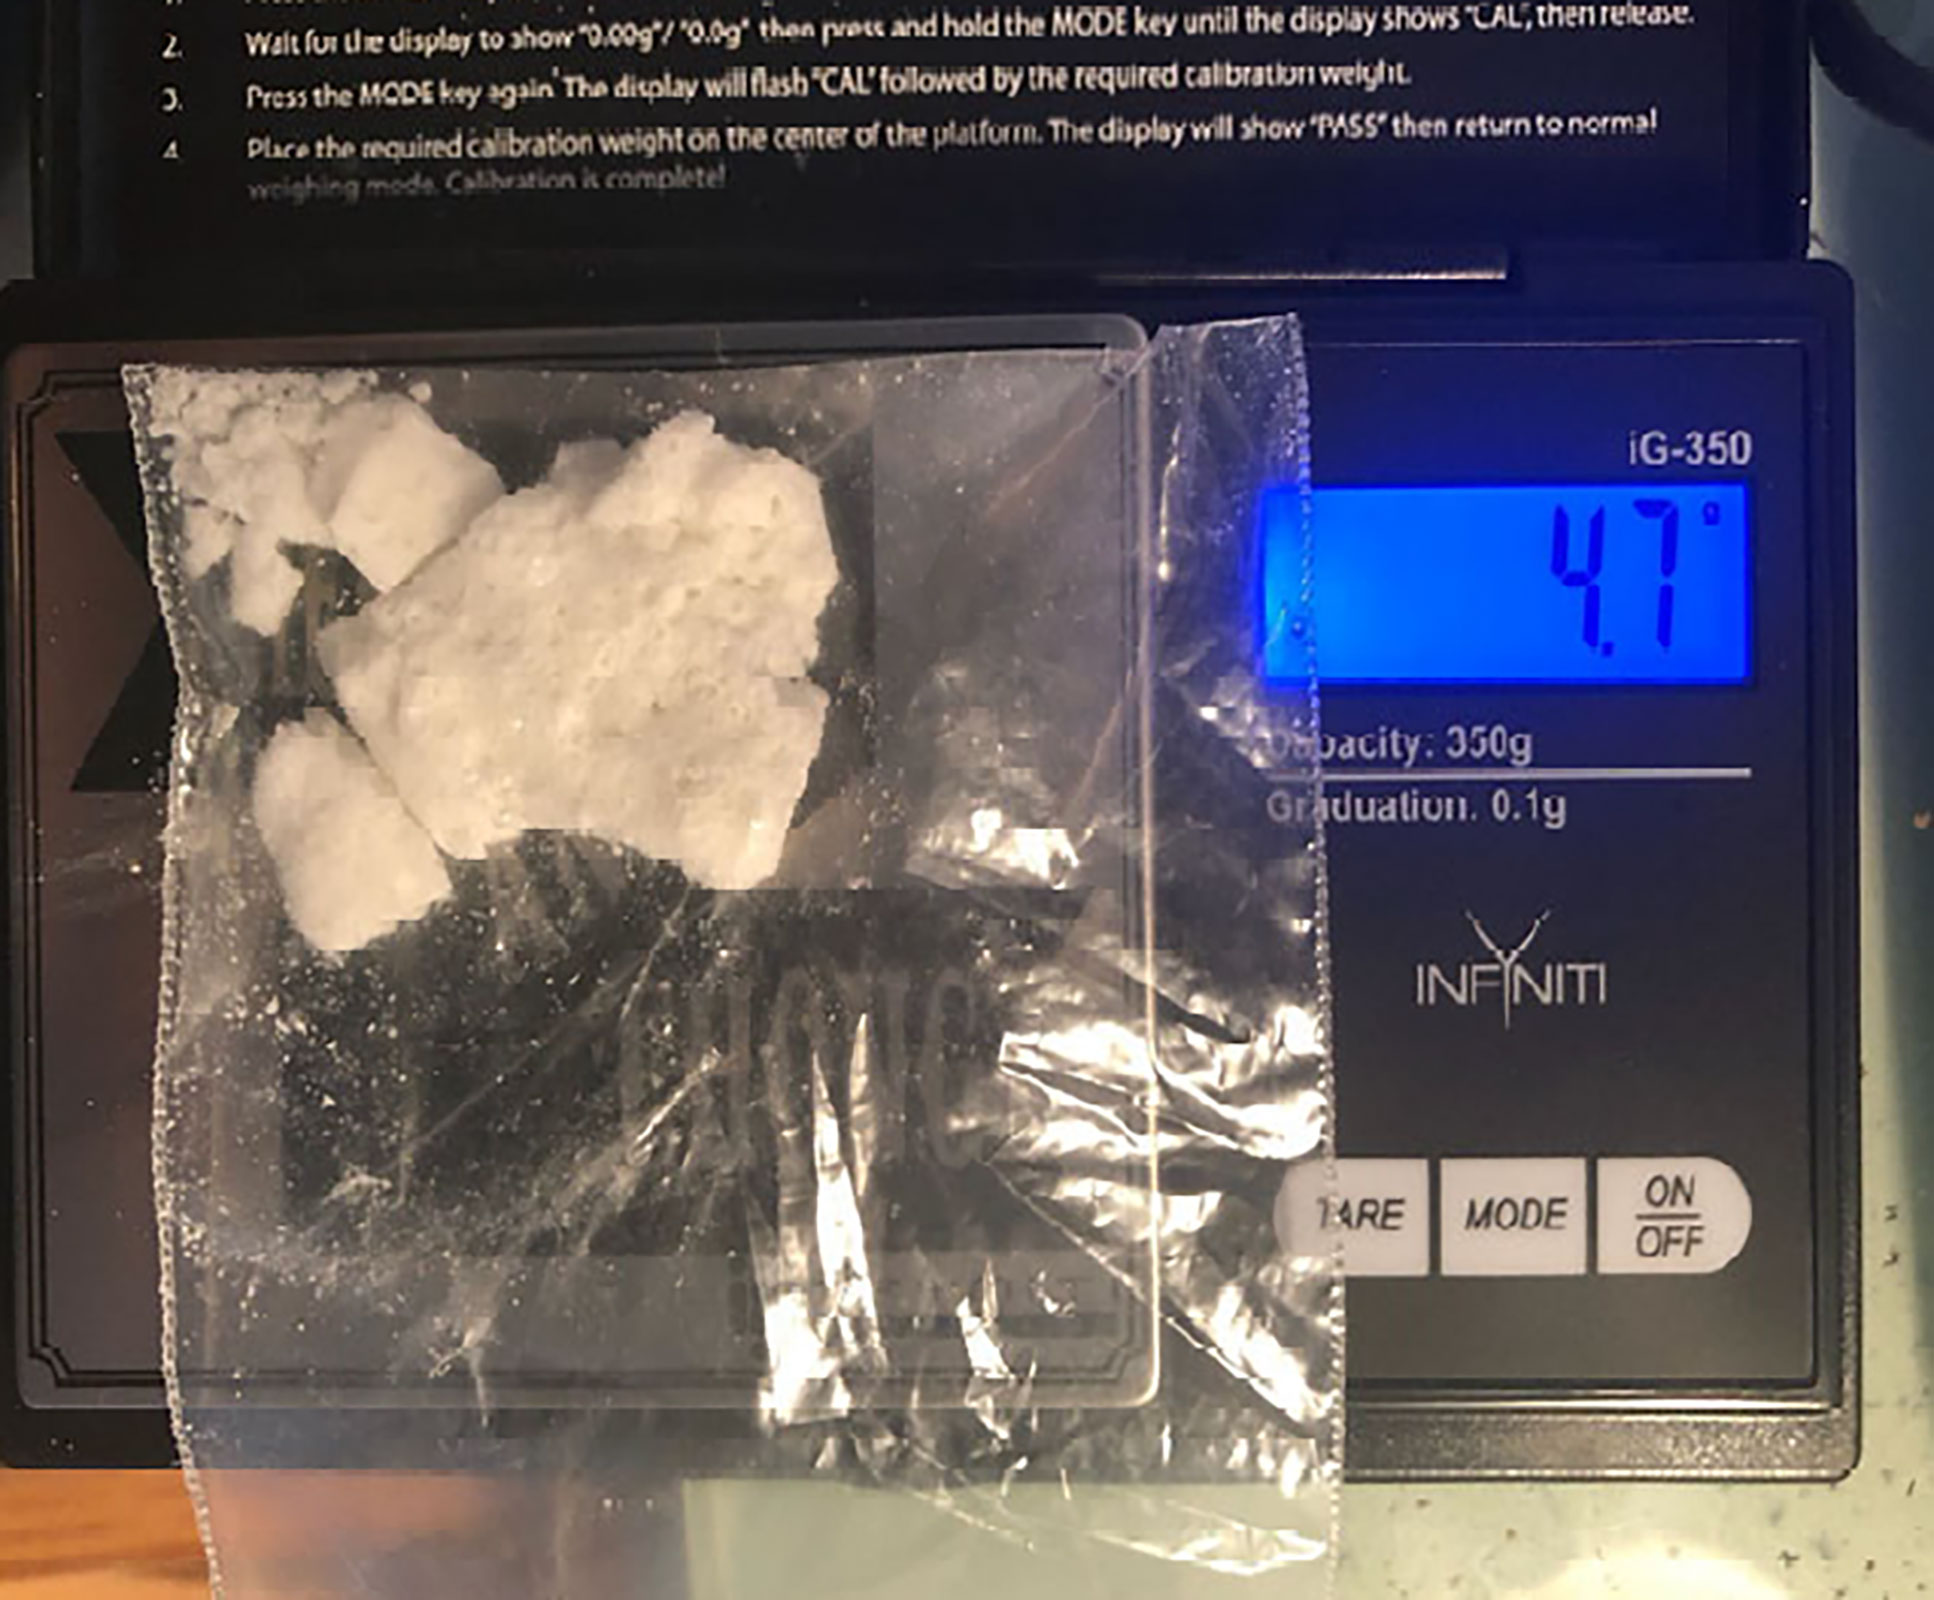 This photo from the US Department of Justice shows a white substance that appears to be cocaine on a scale.